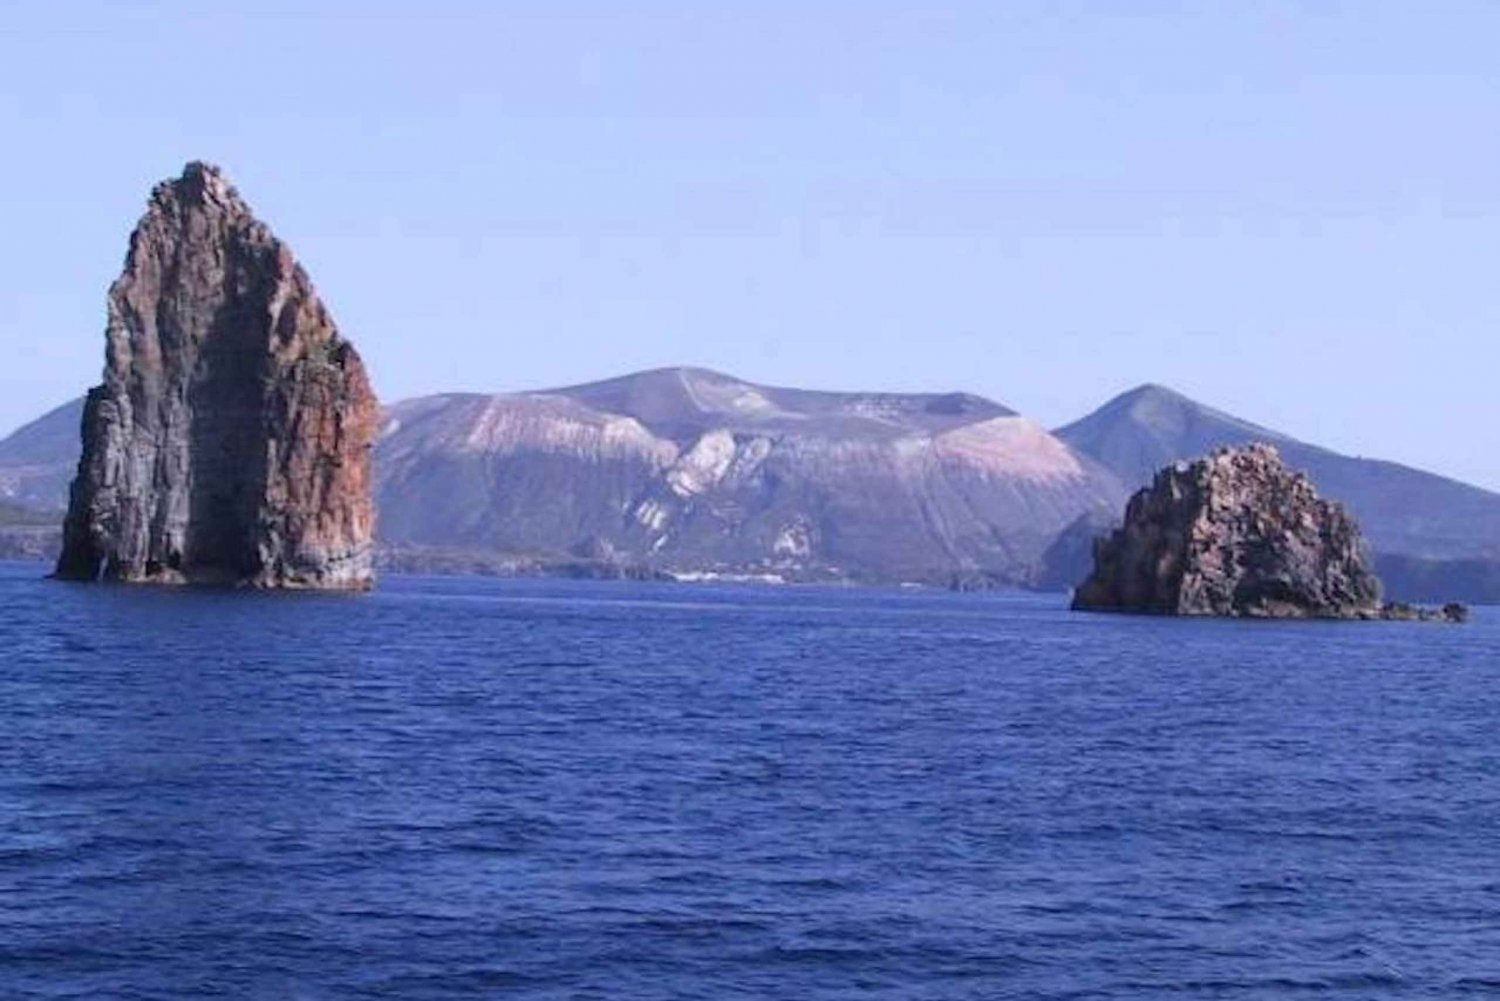 From Lipari: Boat Tour to Salina with Stops